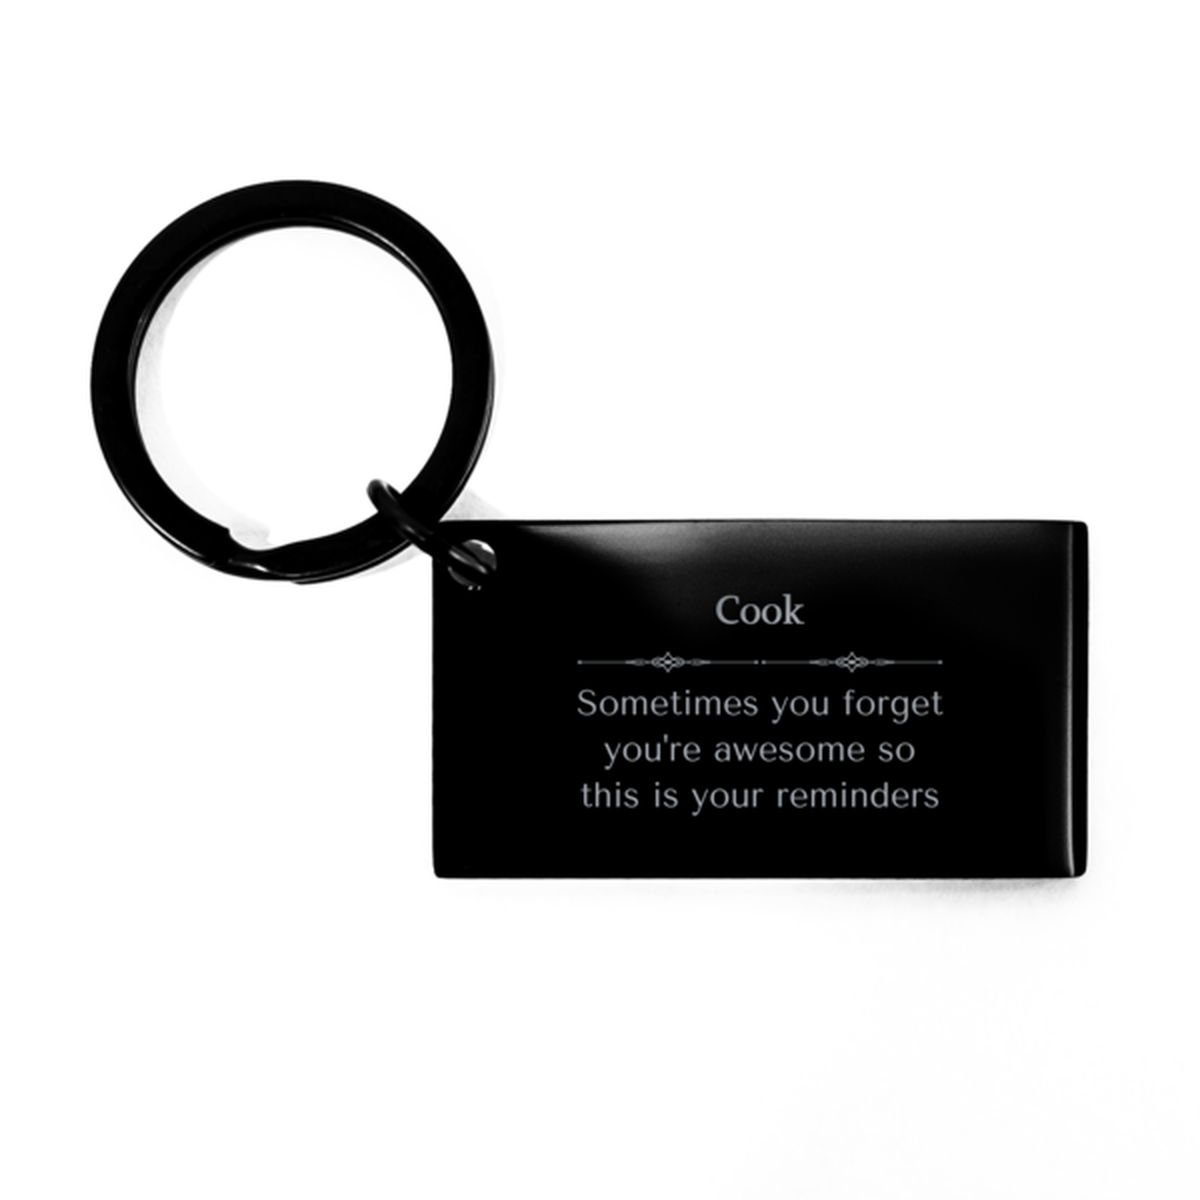 Sentimental Cook Keychain, Executive Assistant Sometimes you forget you're awesome so this is your reminders, Graduation Christmas Birthday Gifts for Cook, Men, Women, Coworkers